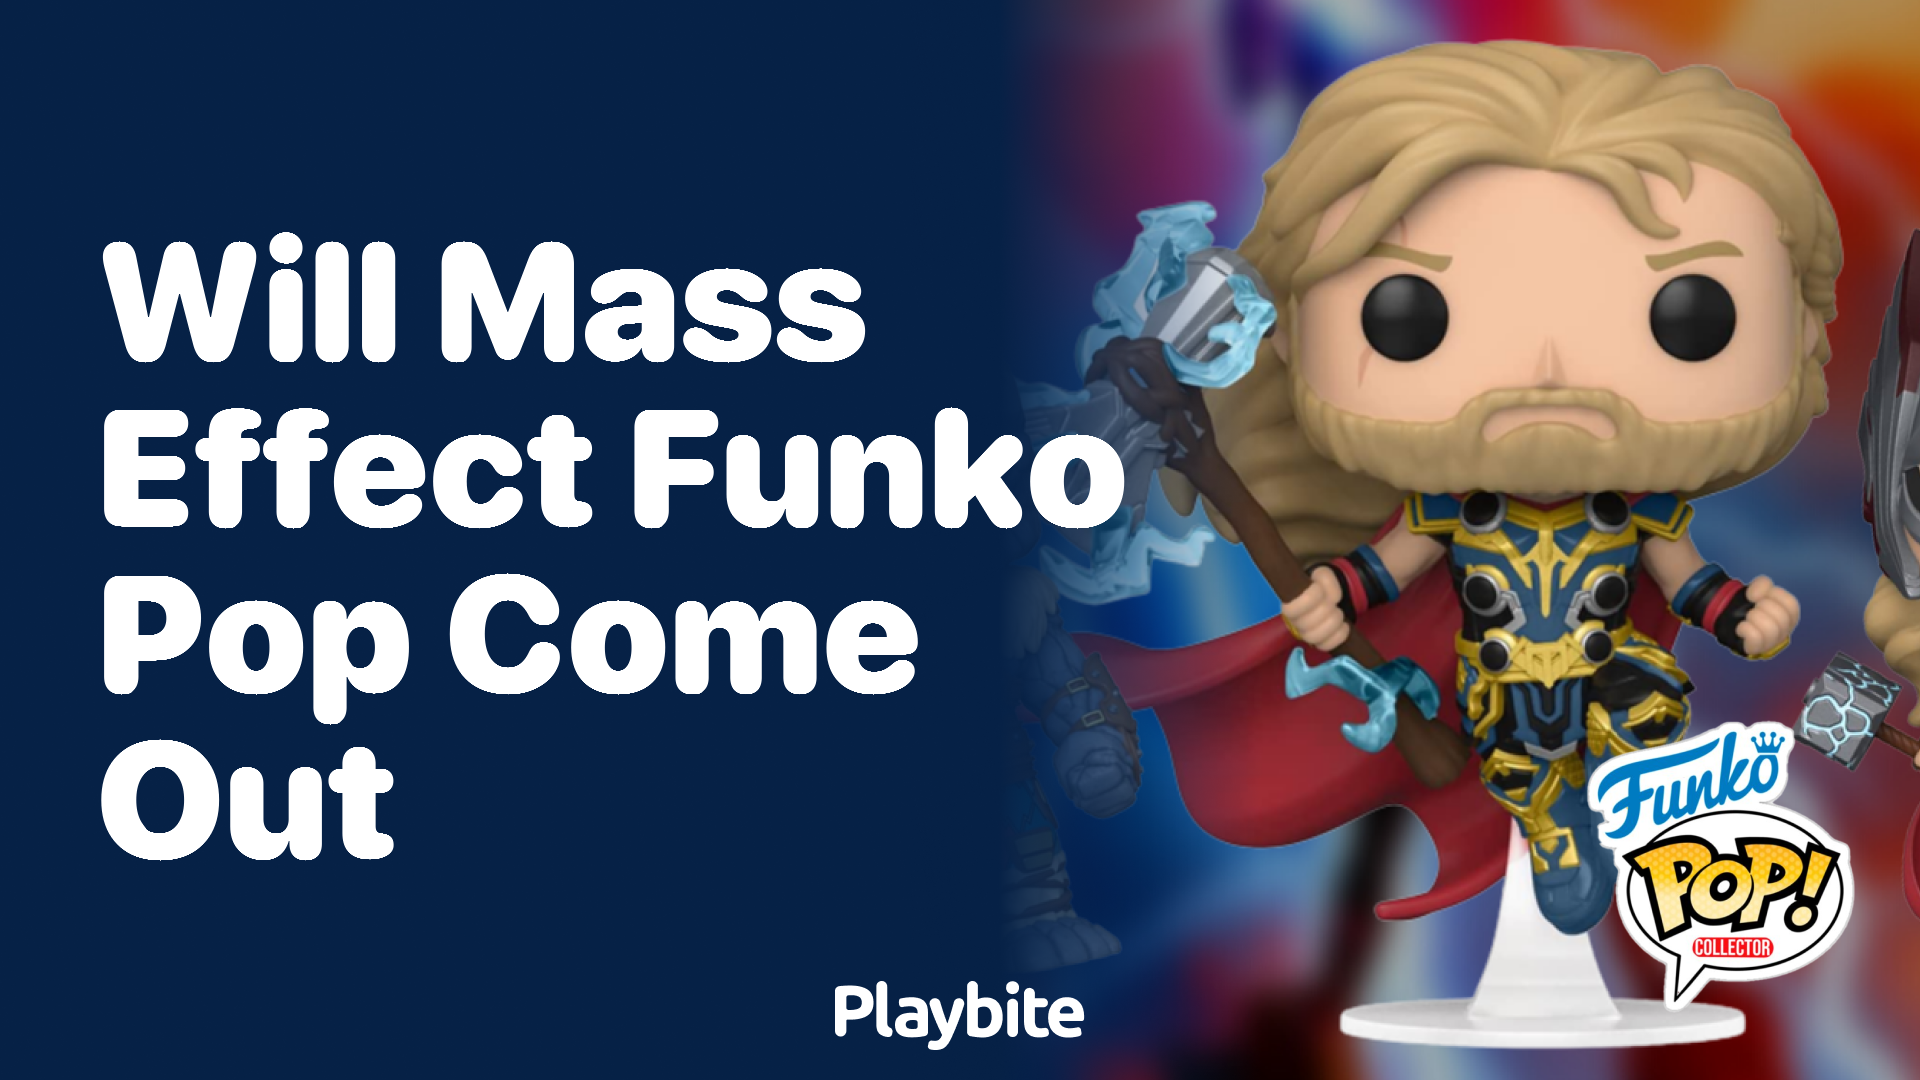 Will there be a Mass Effect Funko Pop released?